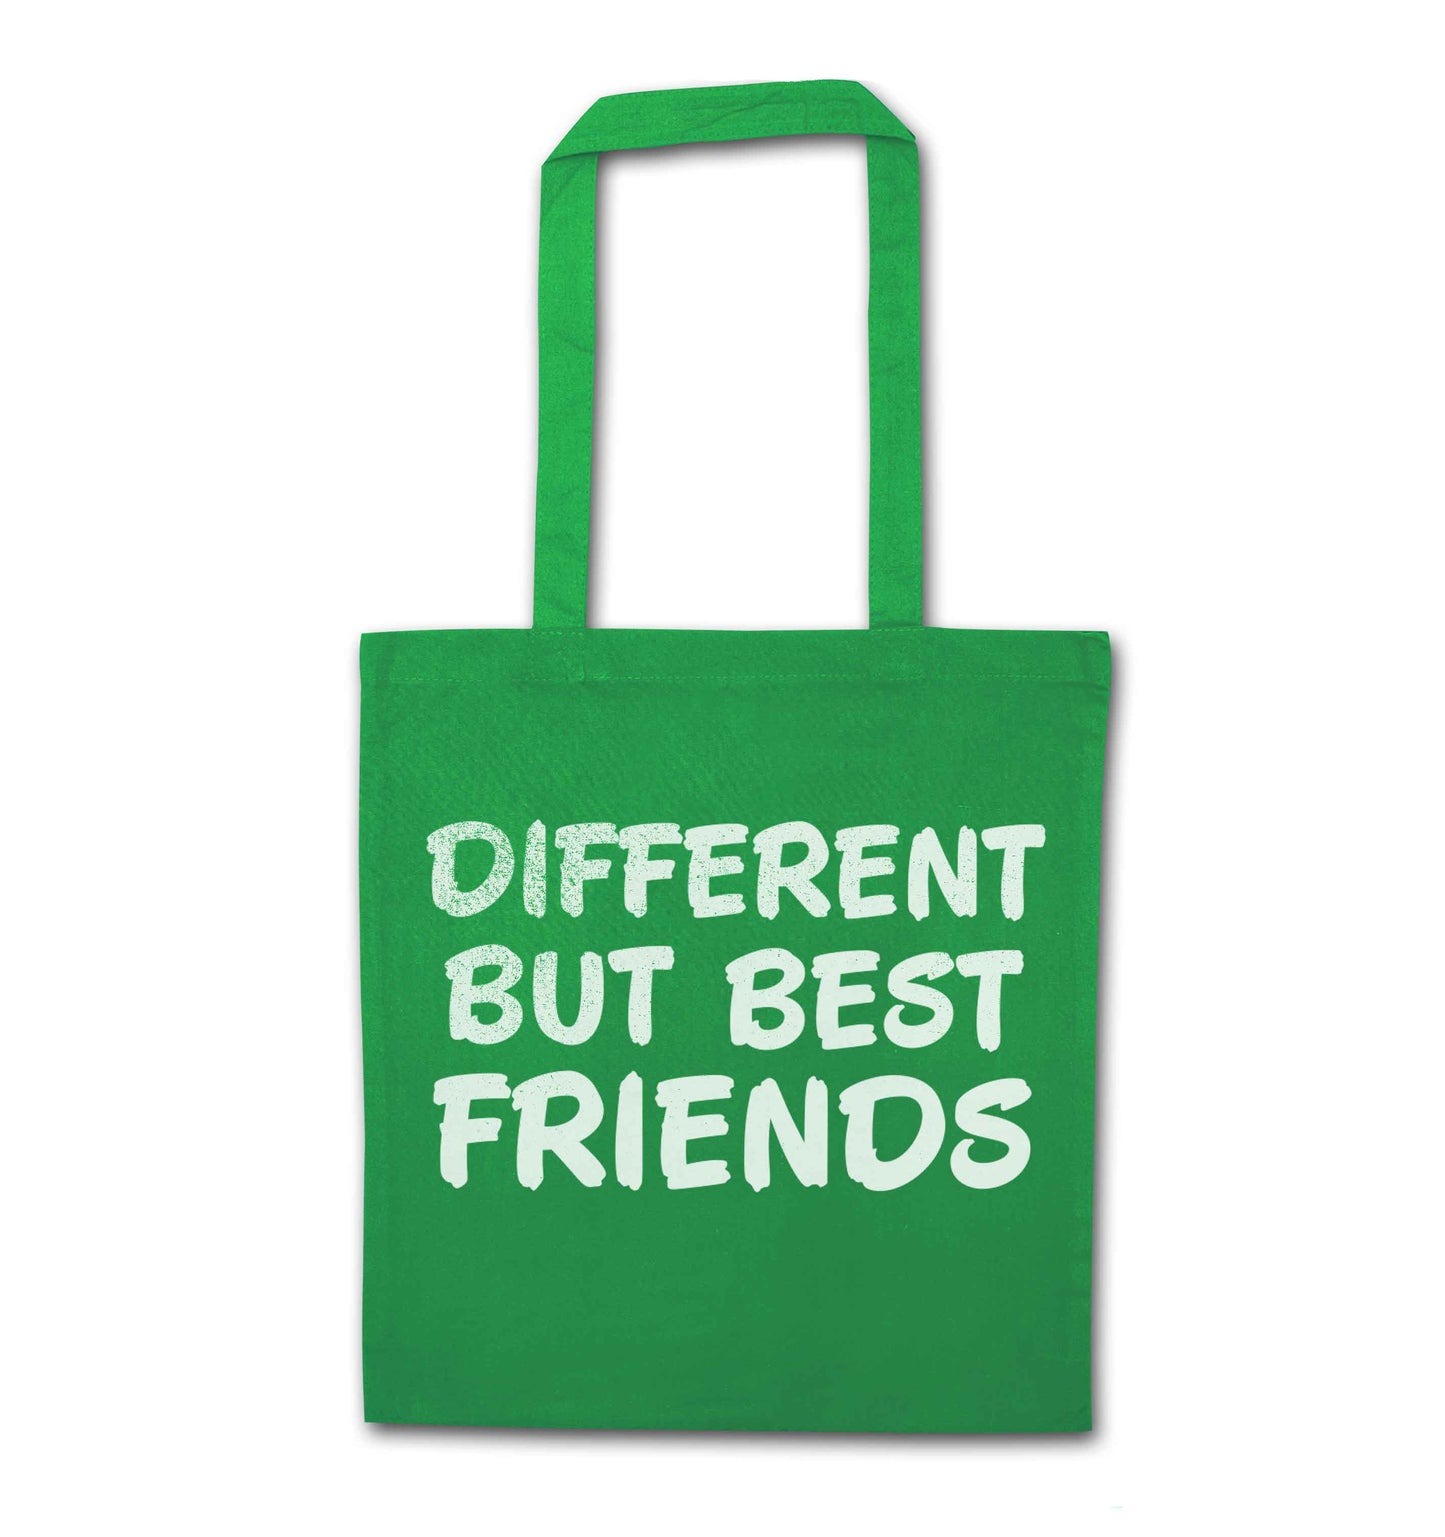 Different but best friends green tote bag